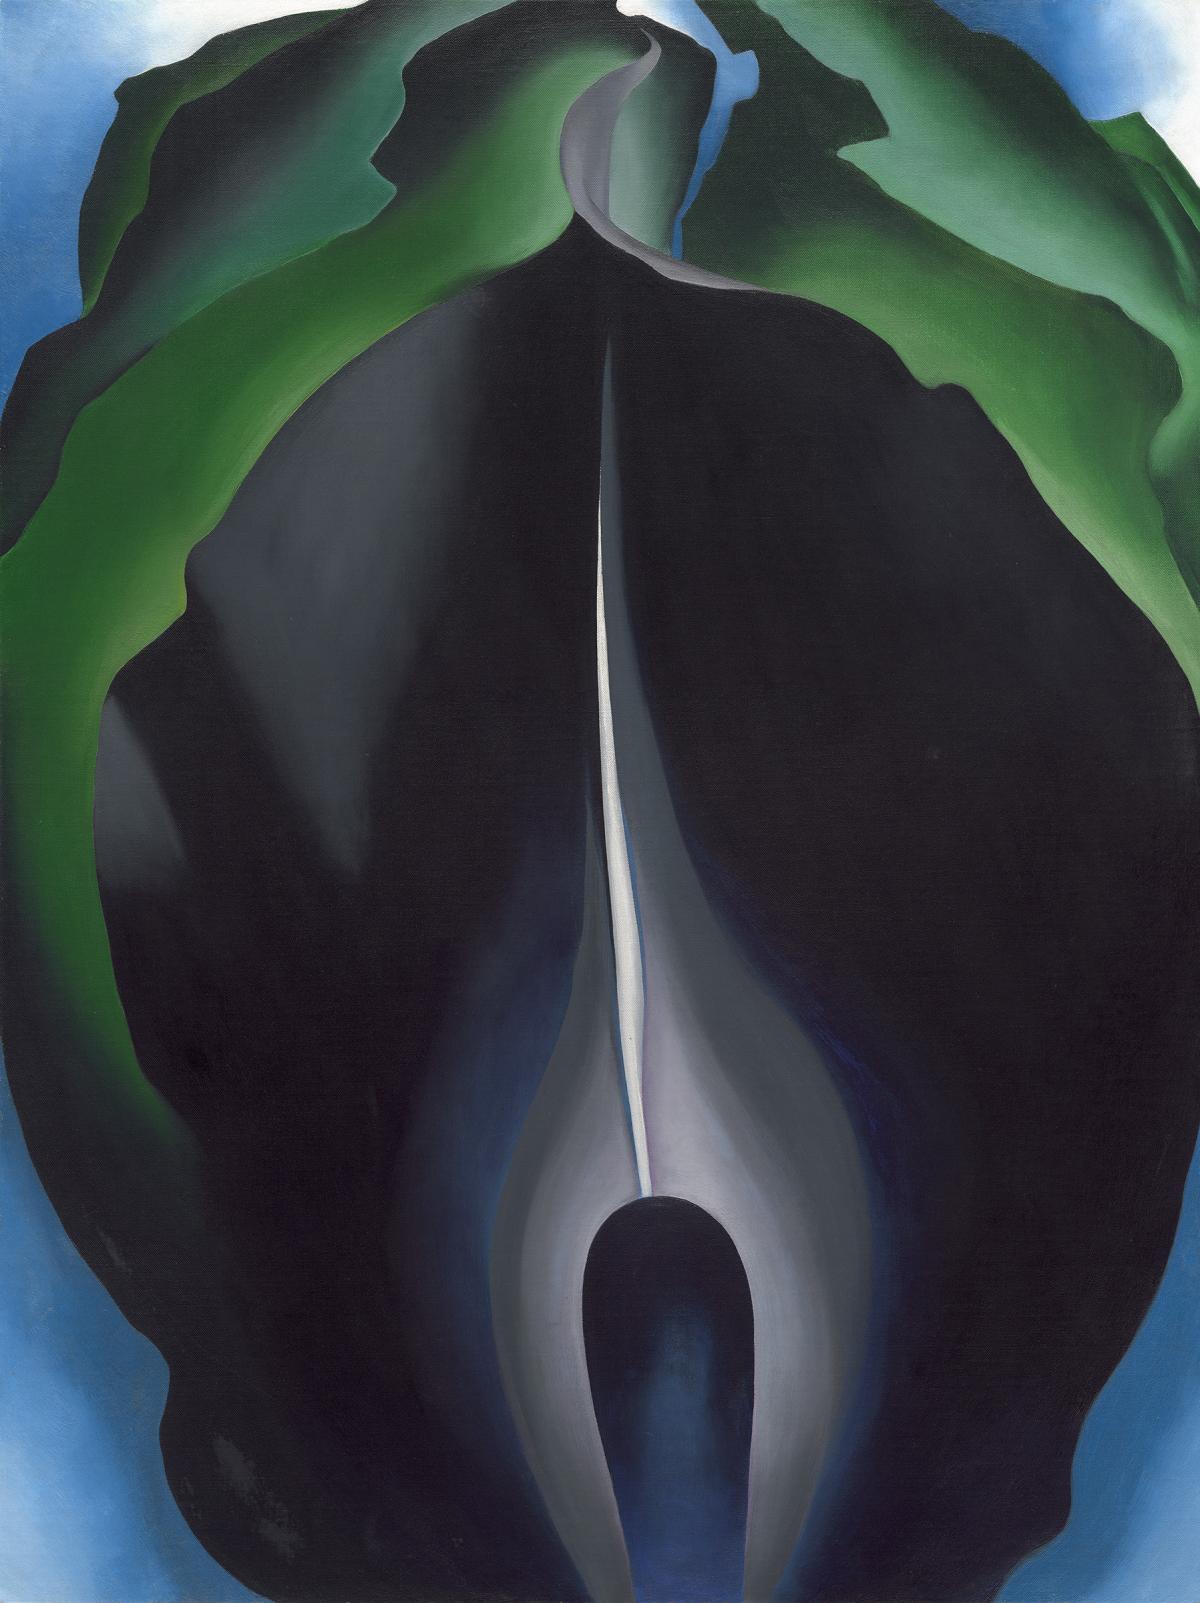 Georgia O'Keeffe, Jack-in-the-Pulpit No. IV, 1930